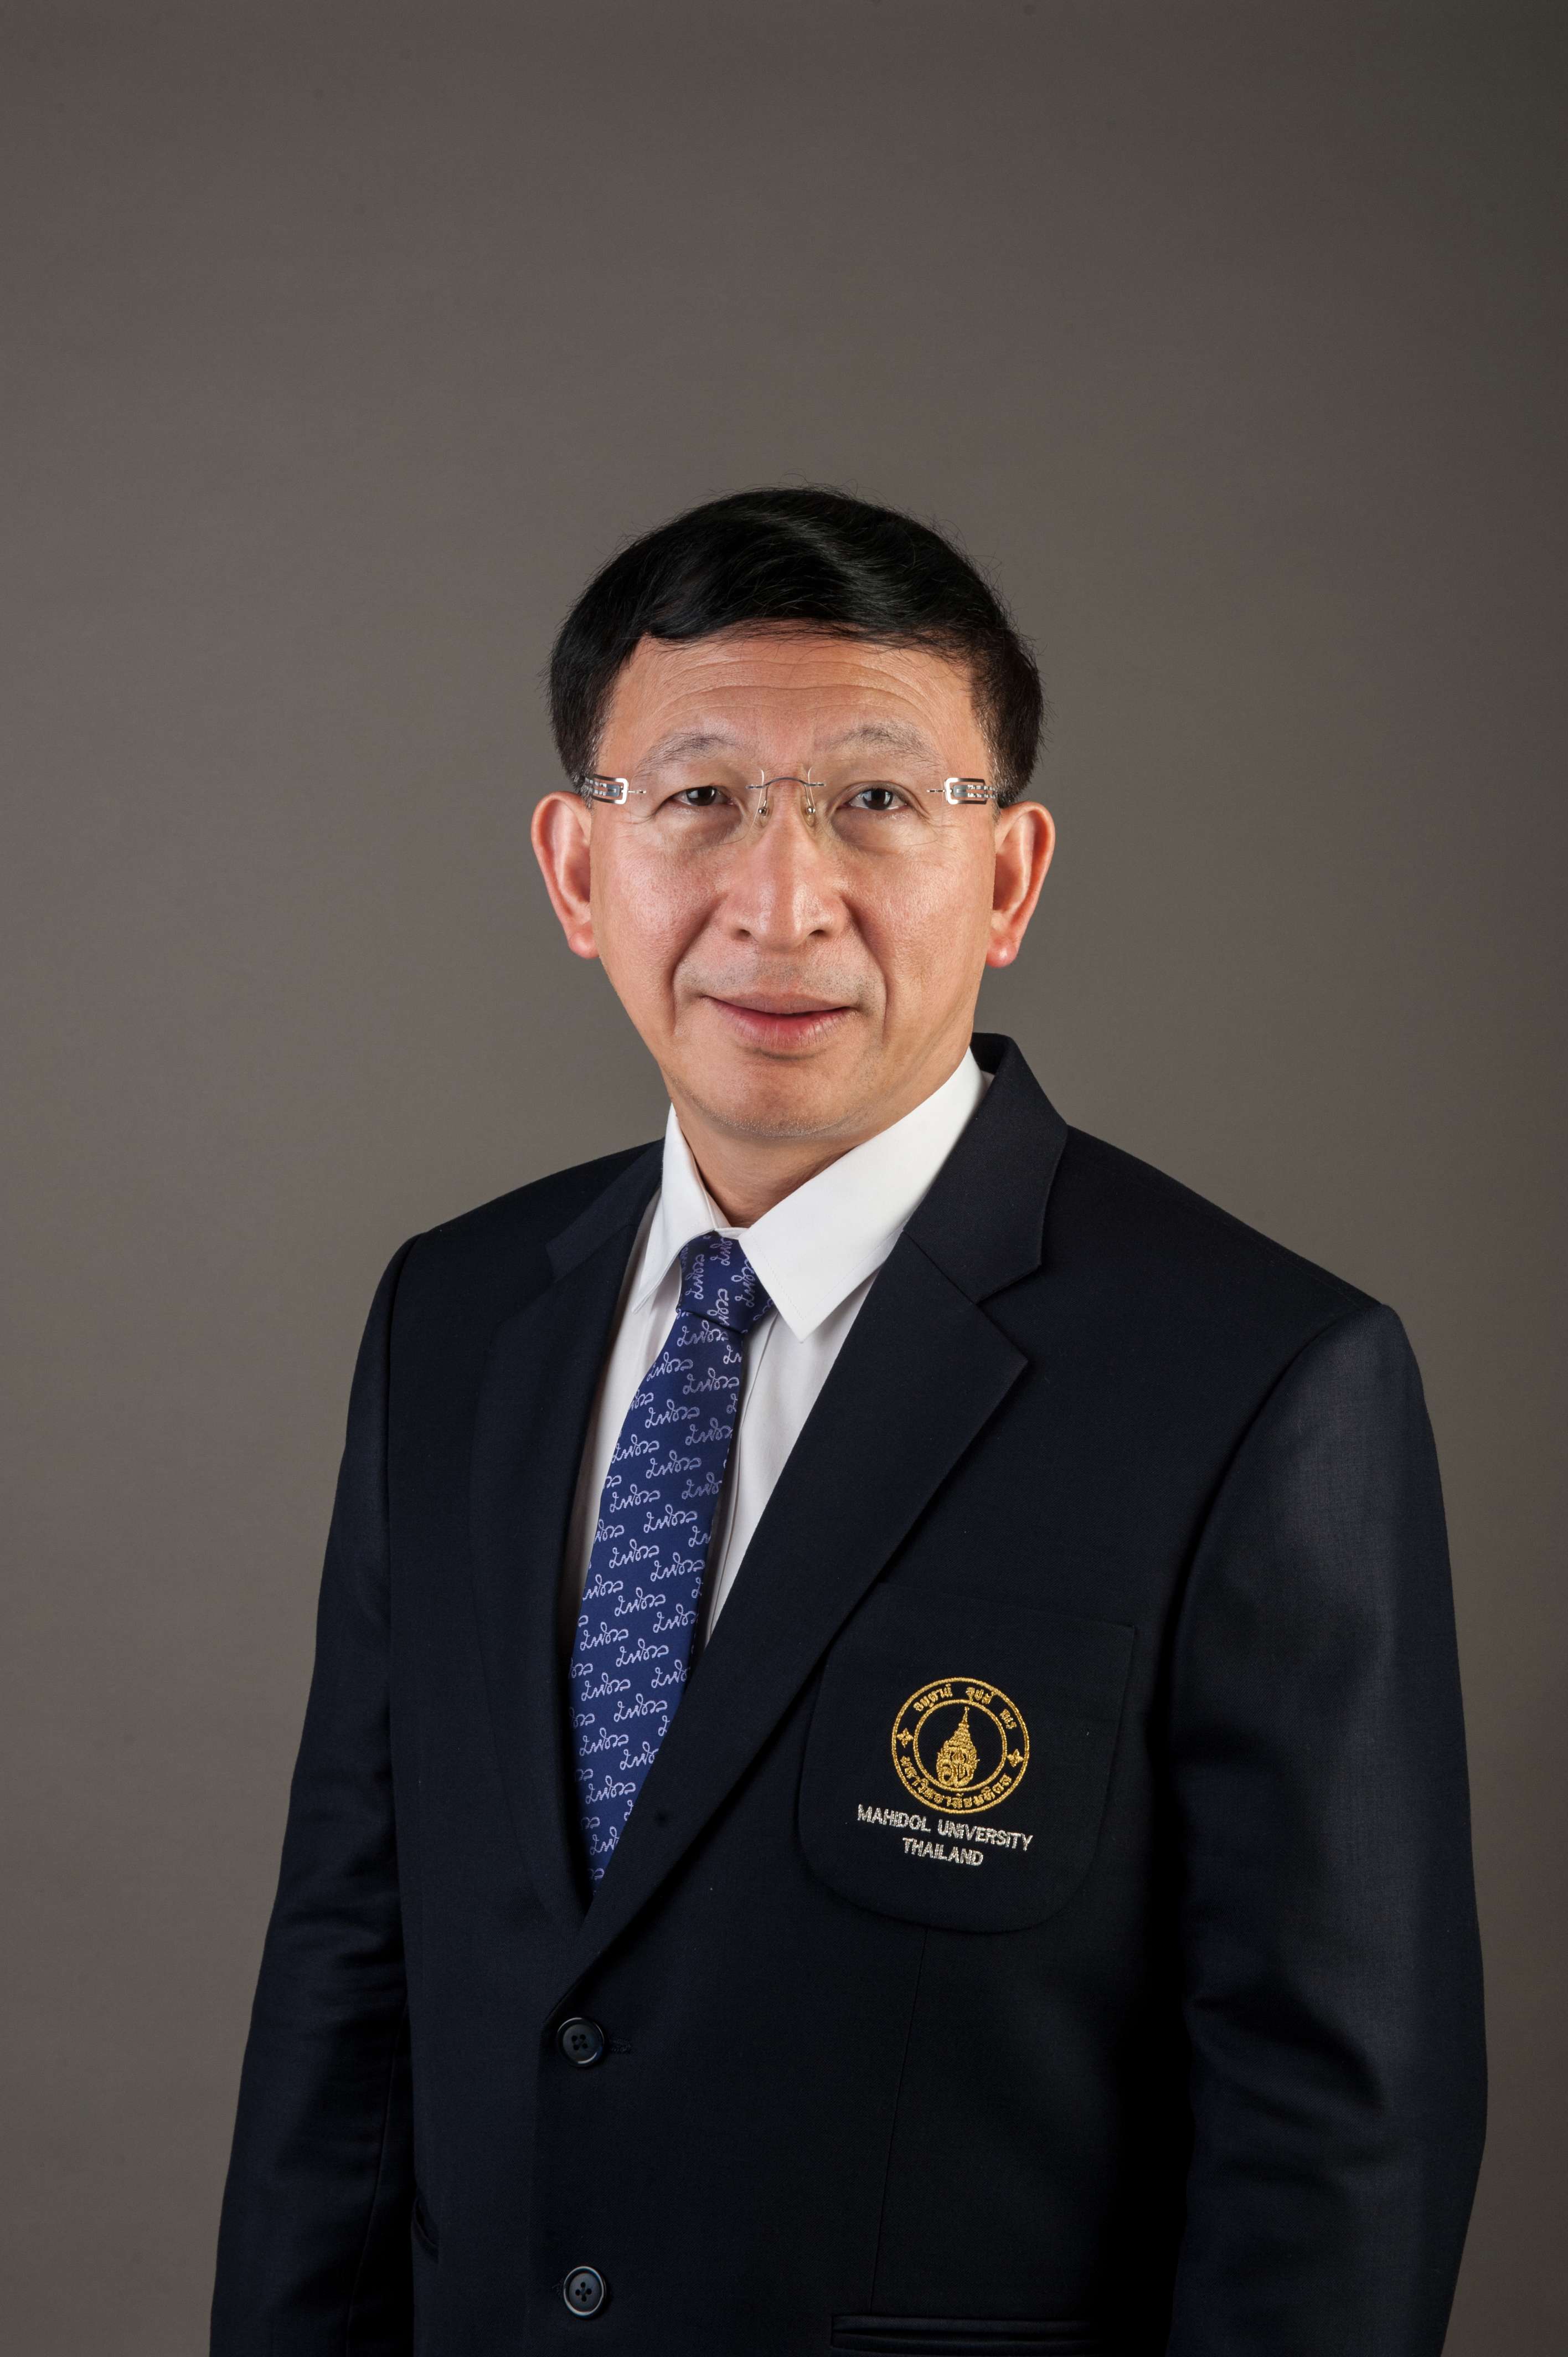 Dr Udom Kachintorn, clinical professor and president of Thailand’s Mahidol University